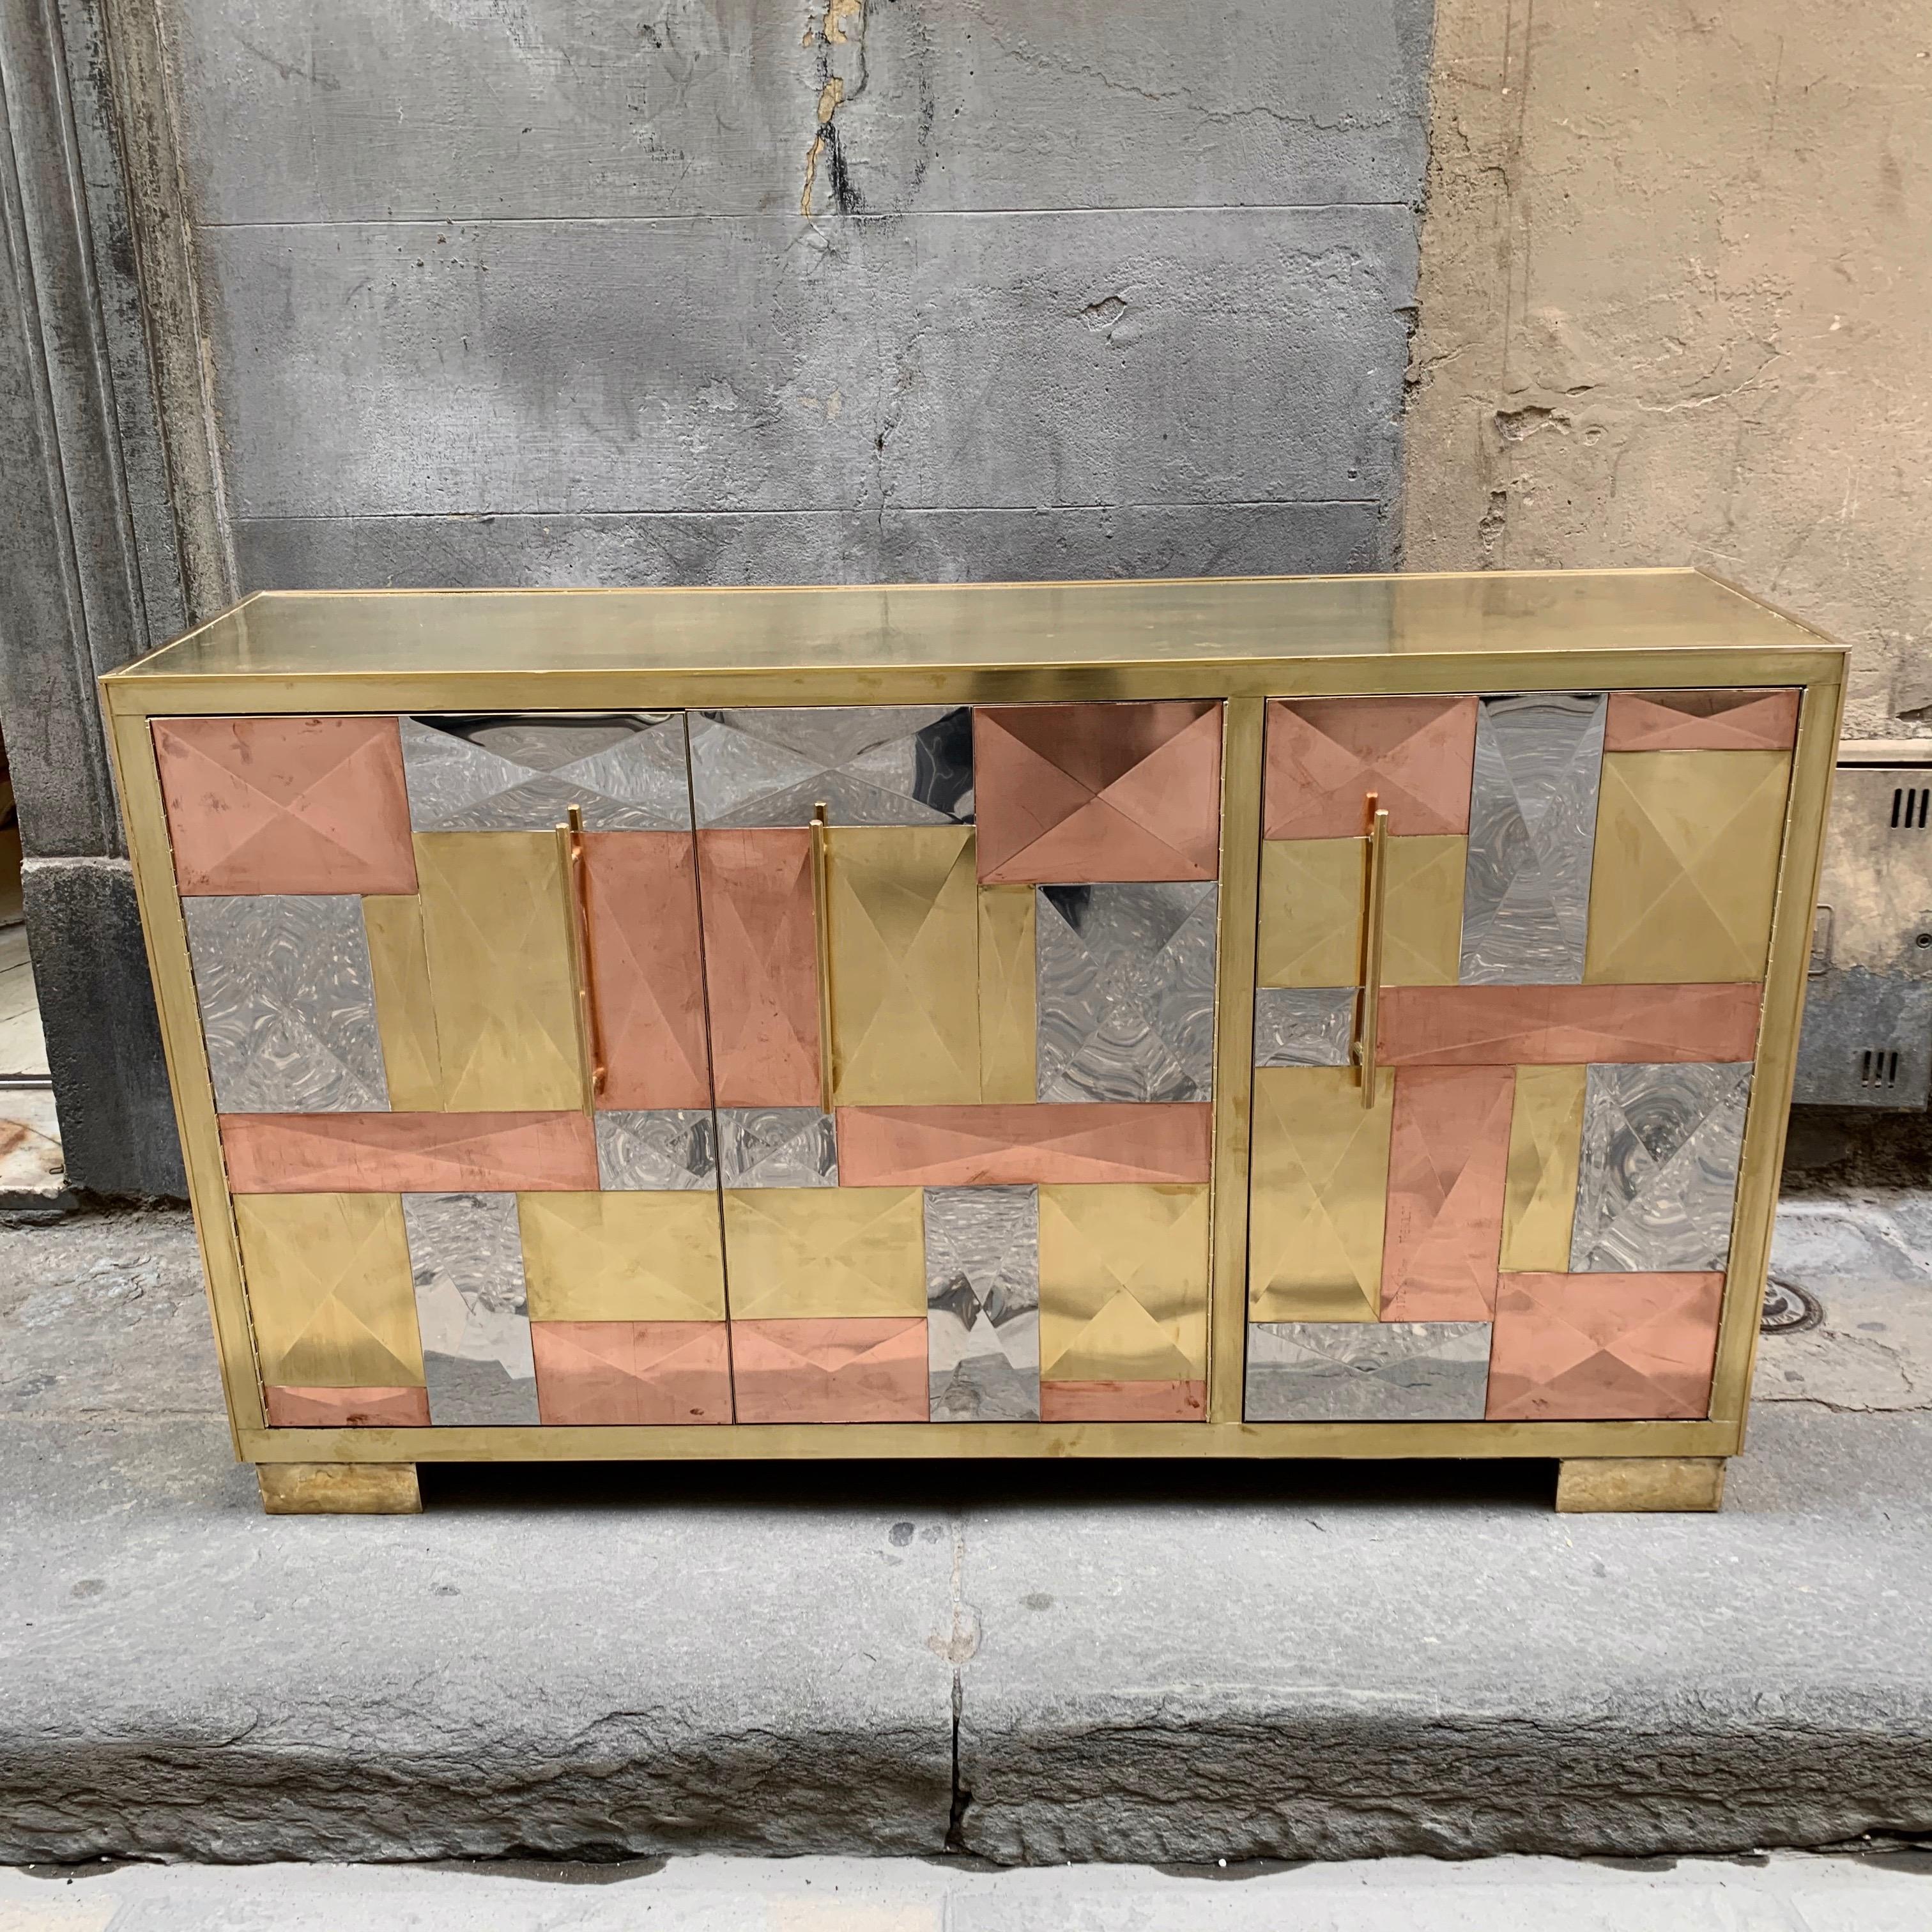 Vintage Italian credenza with brass, copper and steel plates with geometric design.
The top of the furniture, the handles and the legs are made of brass. The sides and the three front doors are made of mosaic pieces of brass, copper and steel